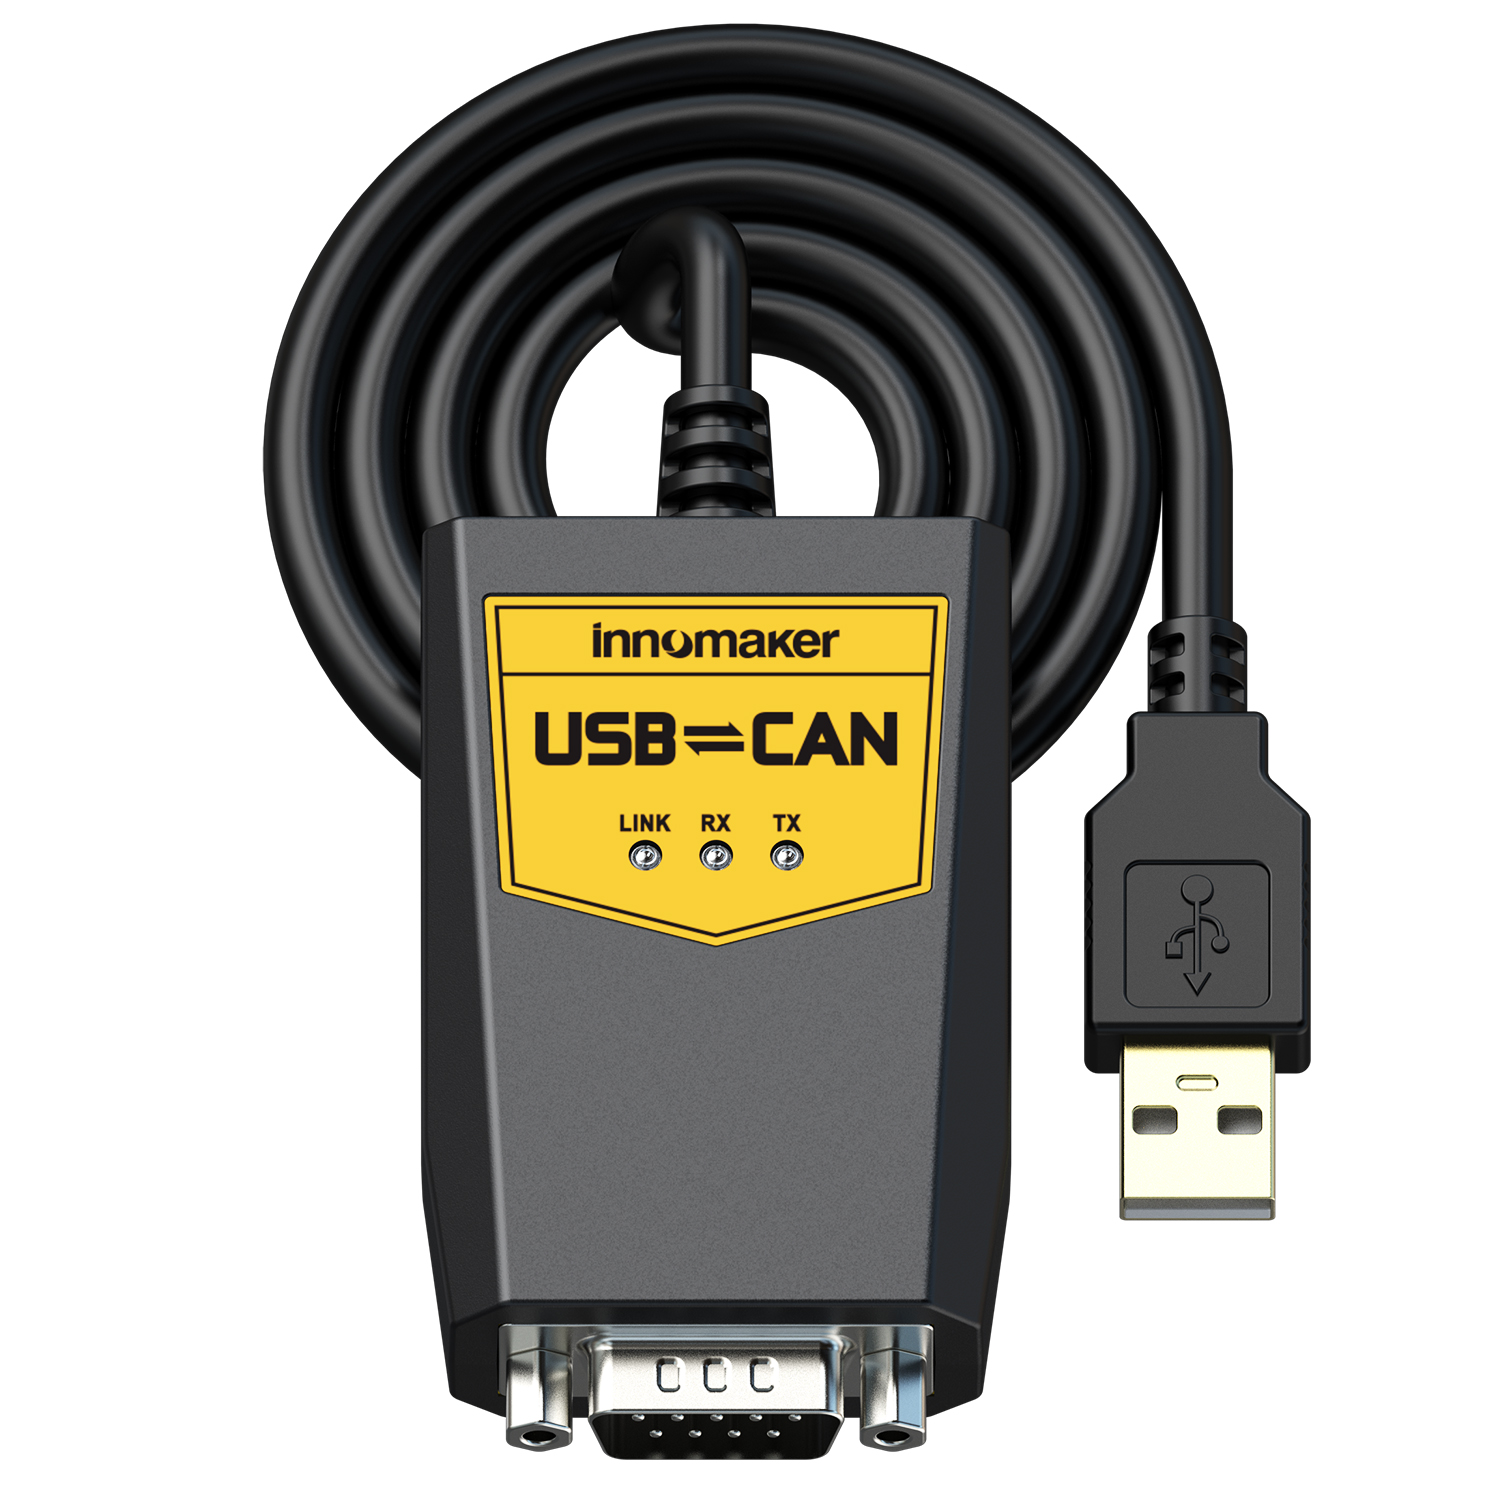 tredobbelt Sherlock Holmes Udlænding USB2CAN-Cable – USB TO CAN Analyzer|Raspberry Pi Solutions|Industrial  Camera